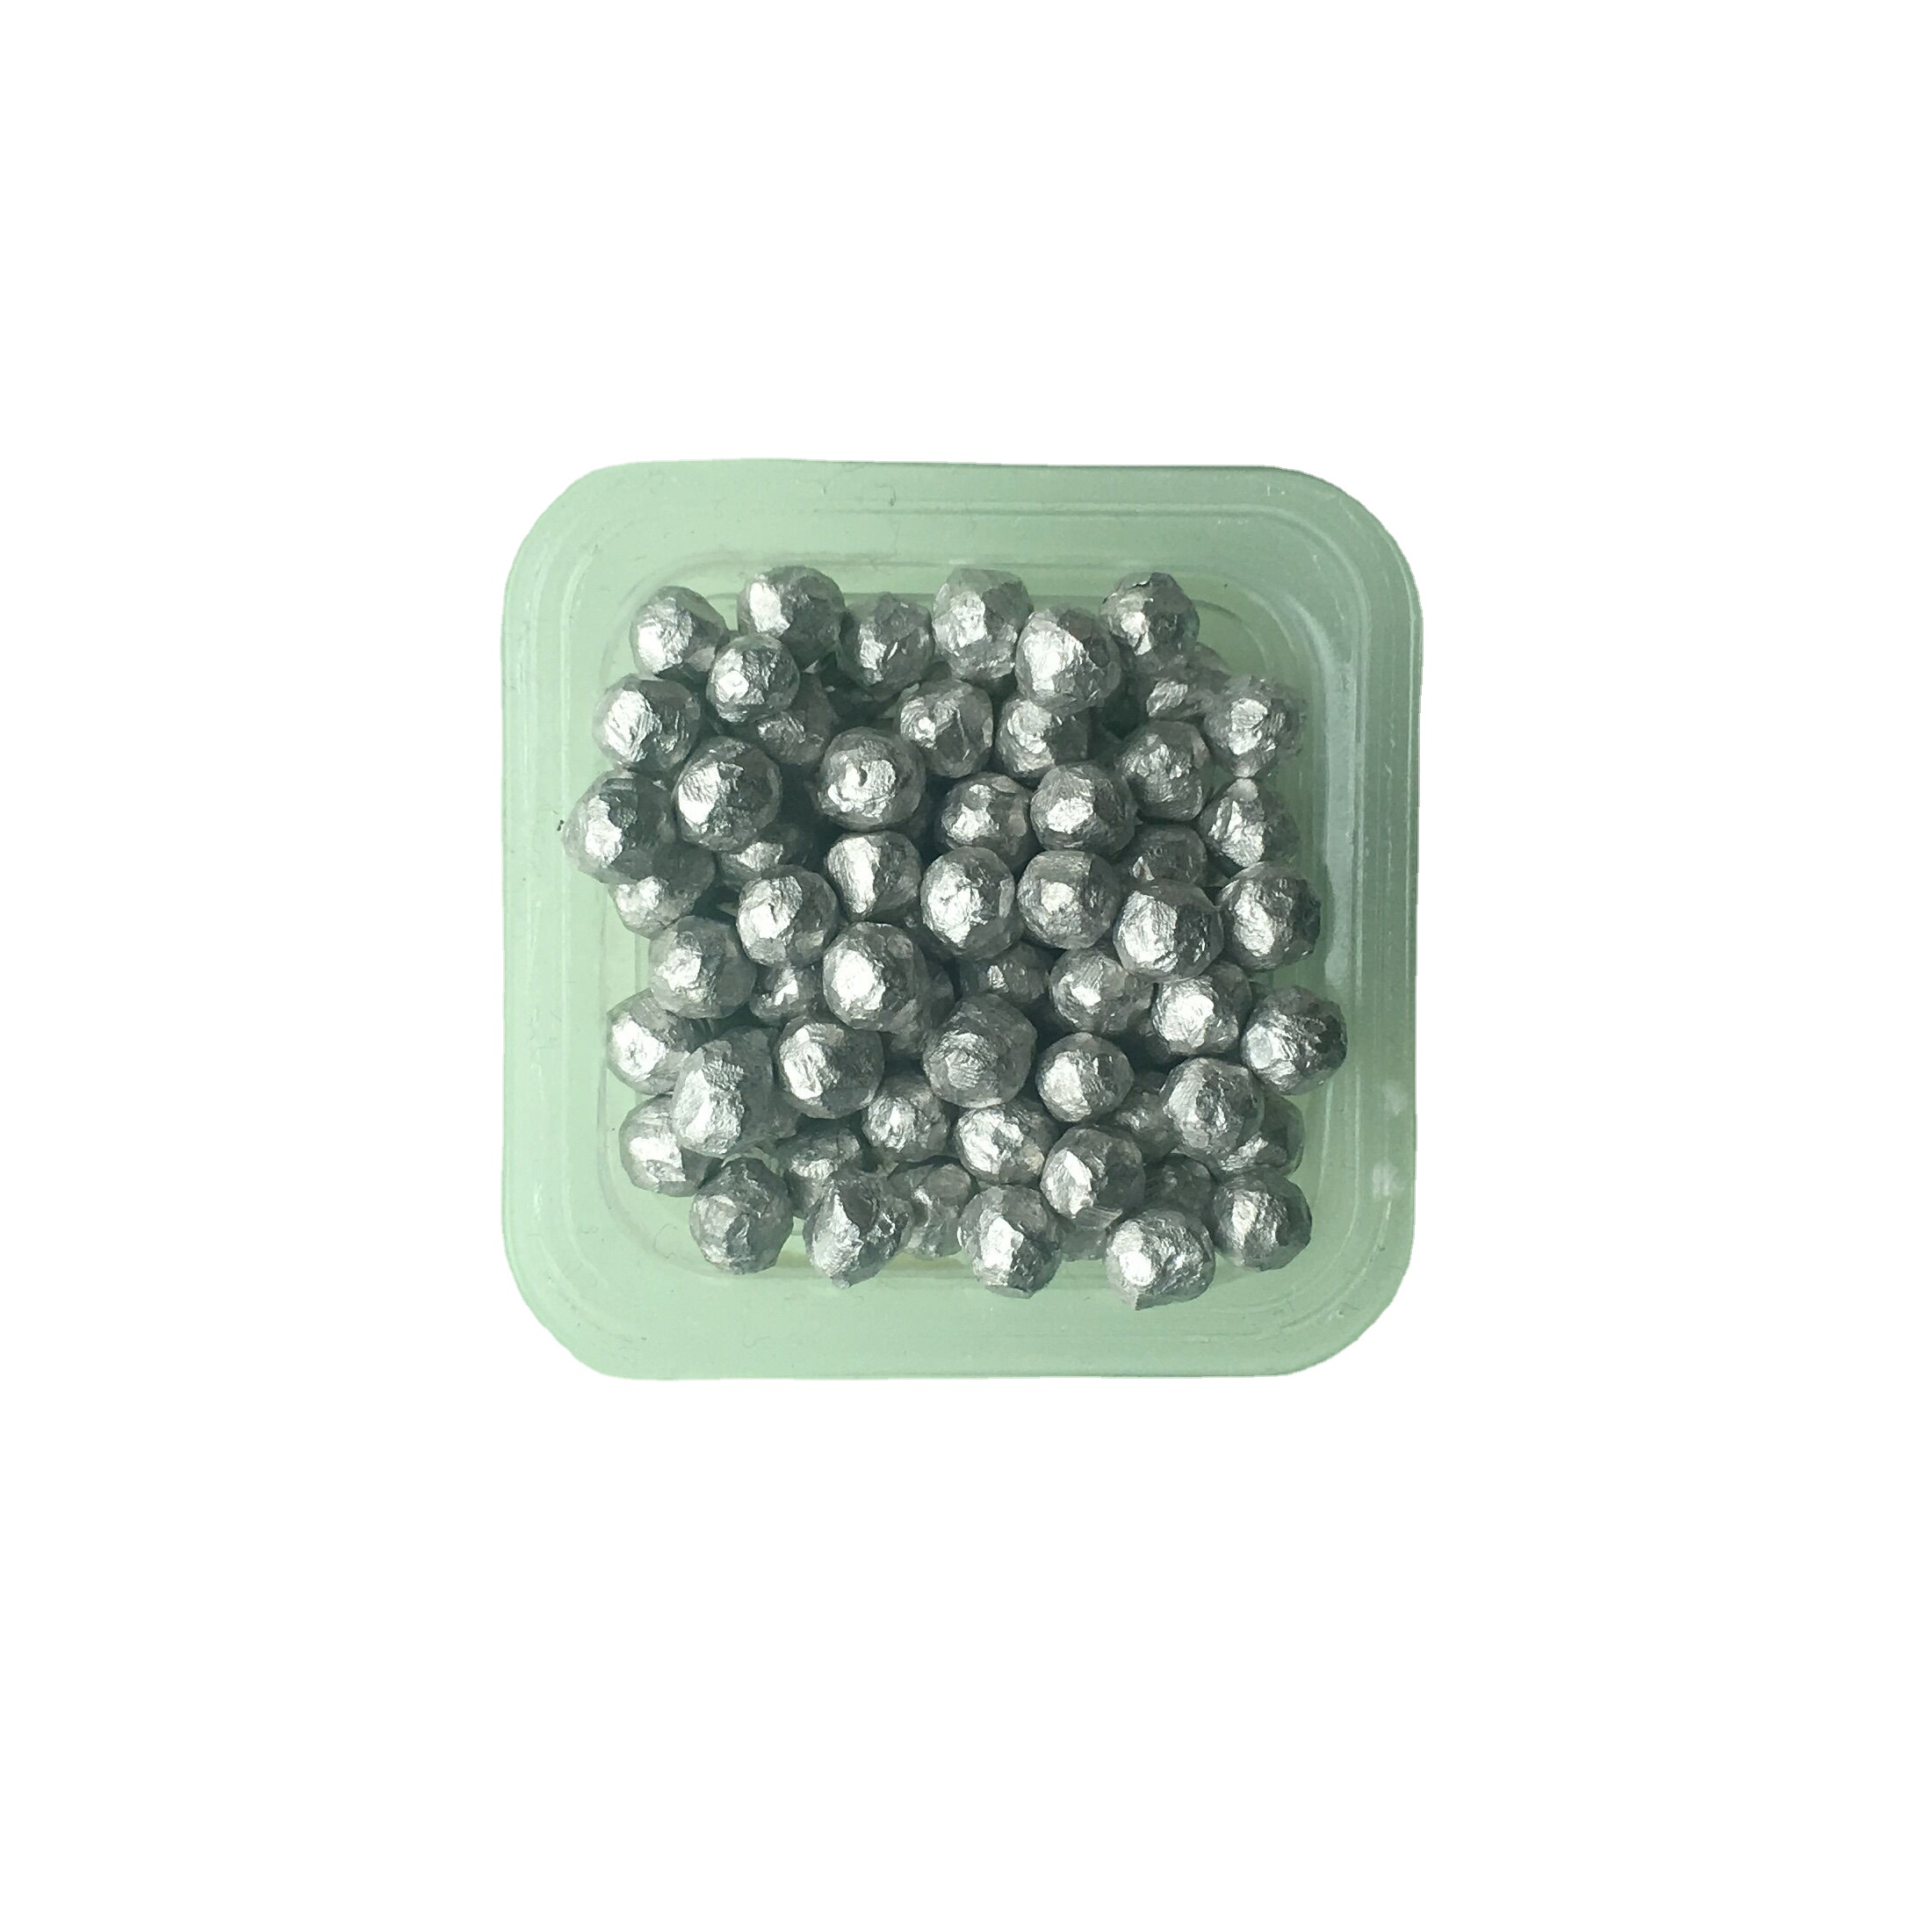 Manufacturers of glass marbles for children’s playgrounds